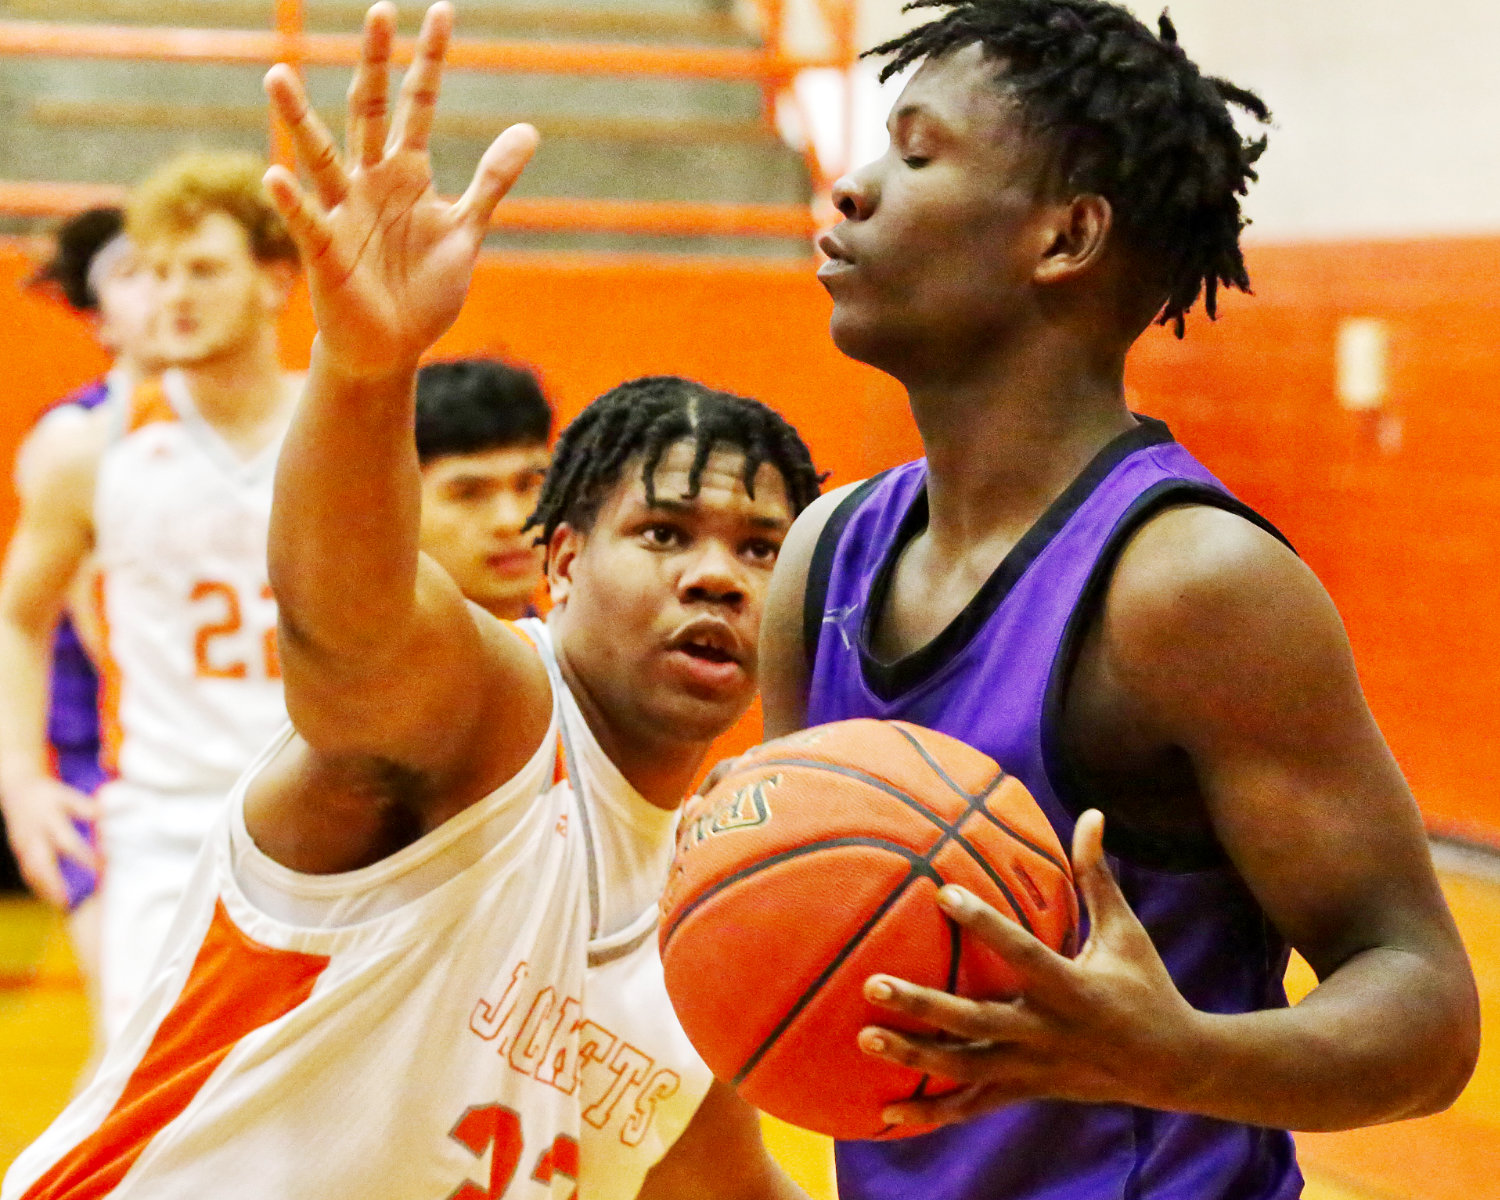 Mineola’s Stephen Ogueri had an excellent game in the paint.